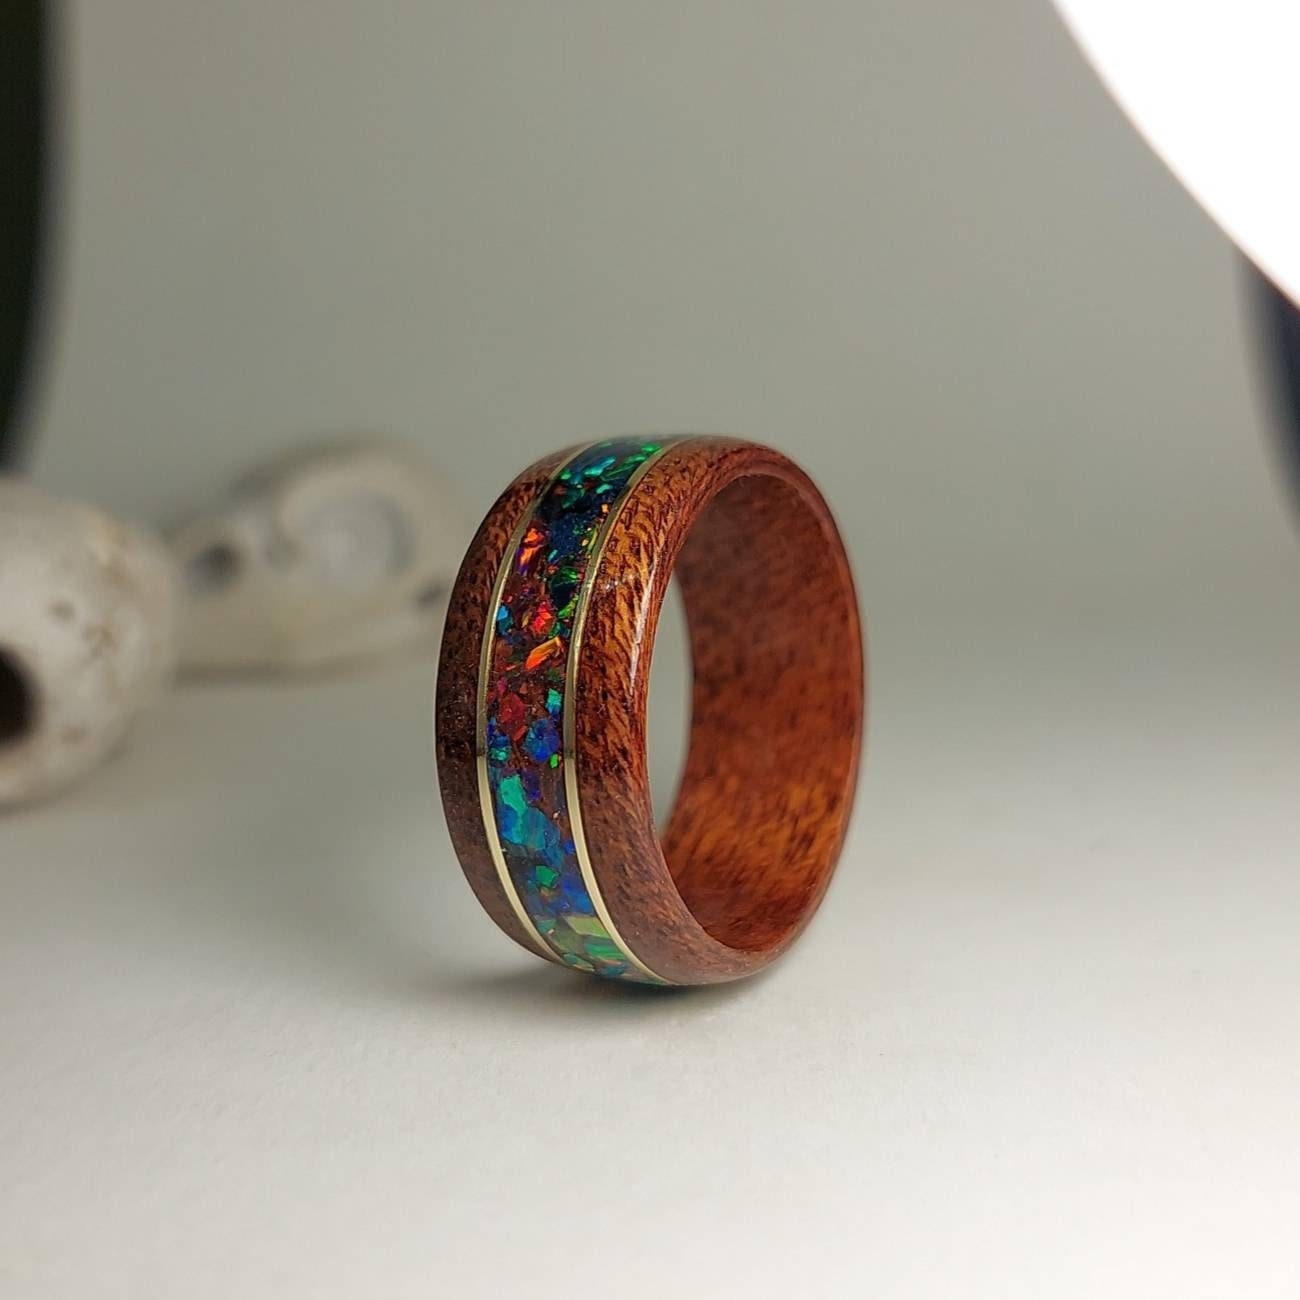 Bentwood Ring, Prism Rosewood Wooden Ring with Ethiopian Fire Opal -  Bentwood Jewelry Designs - Custom Handcrafted Bentwood Wood Rings